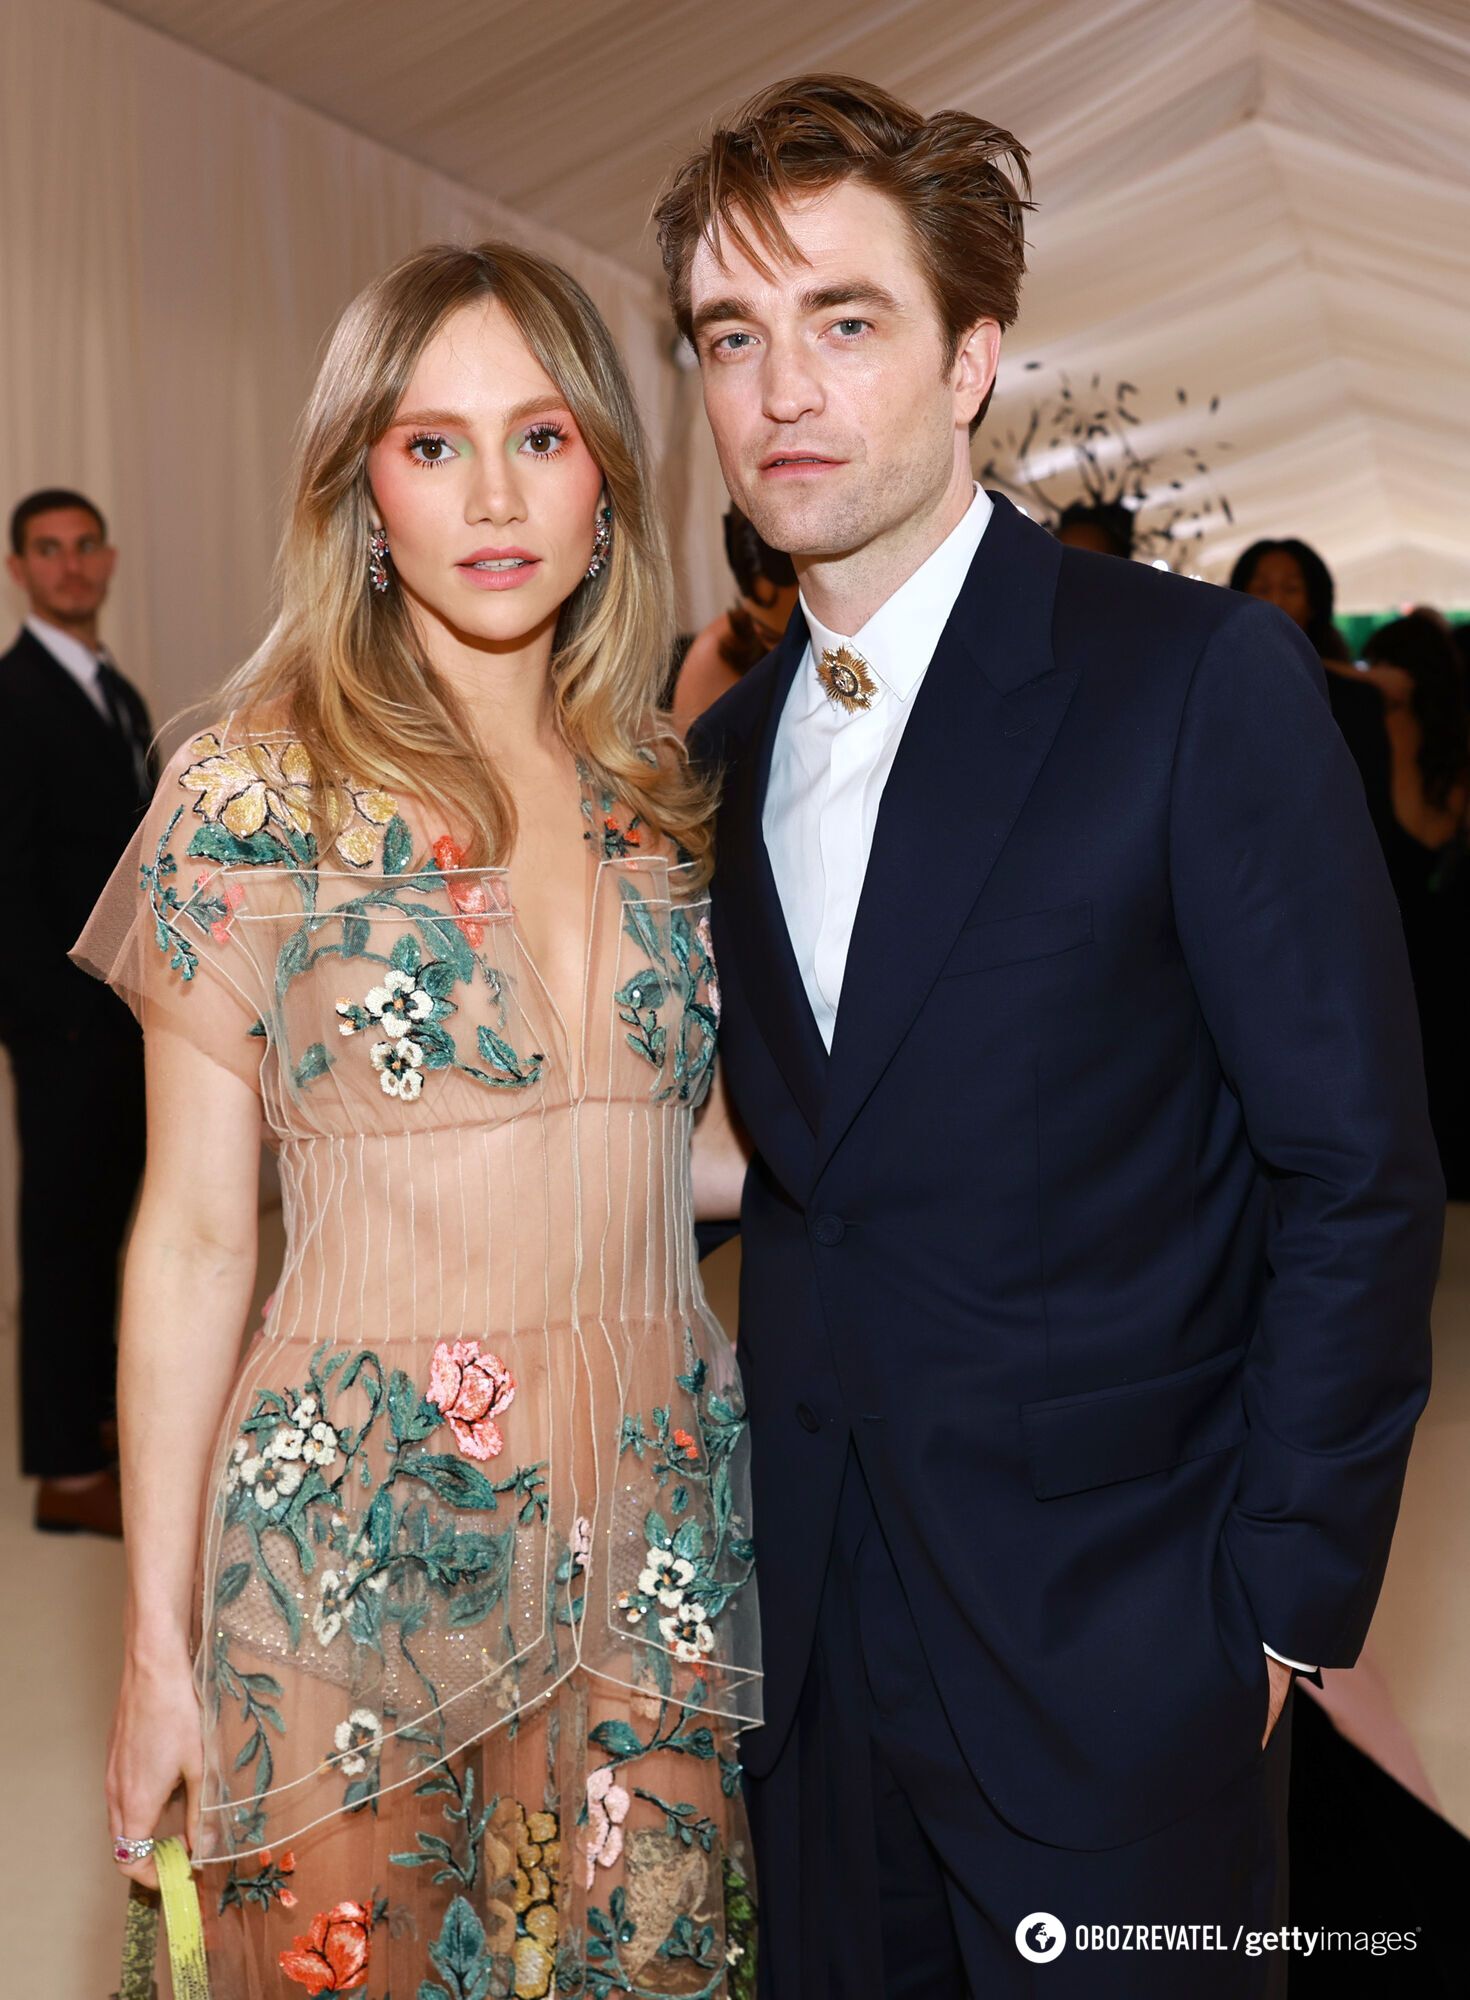 What Robert Pattinson's pregnant lover looks like and how they managed to keep their romance a secret for 5 years